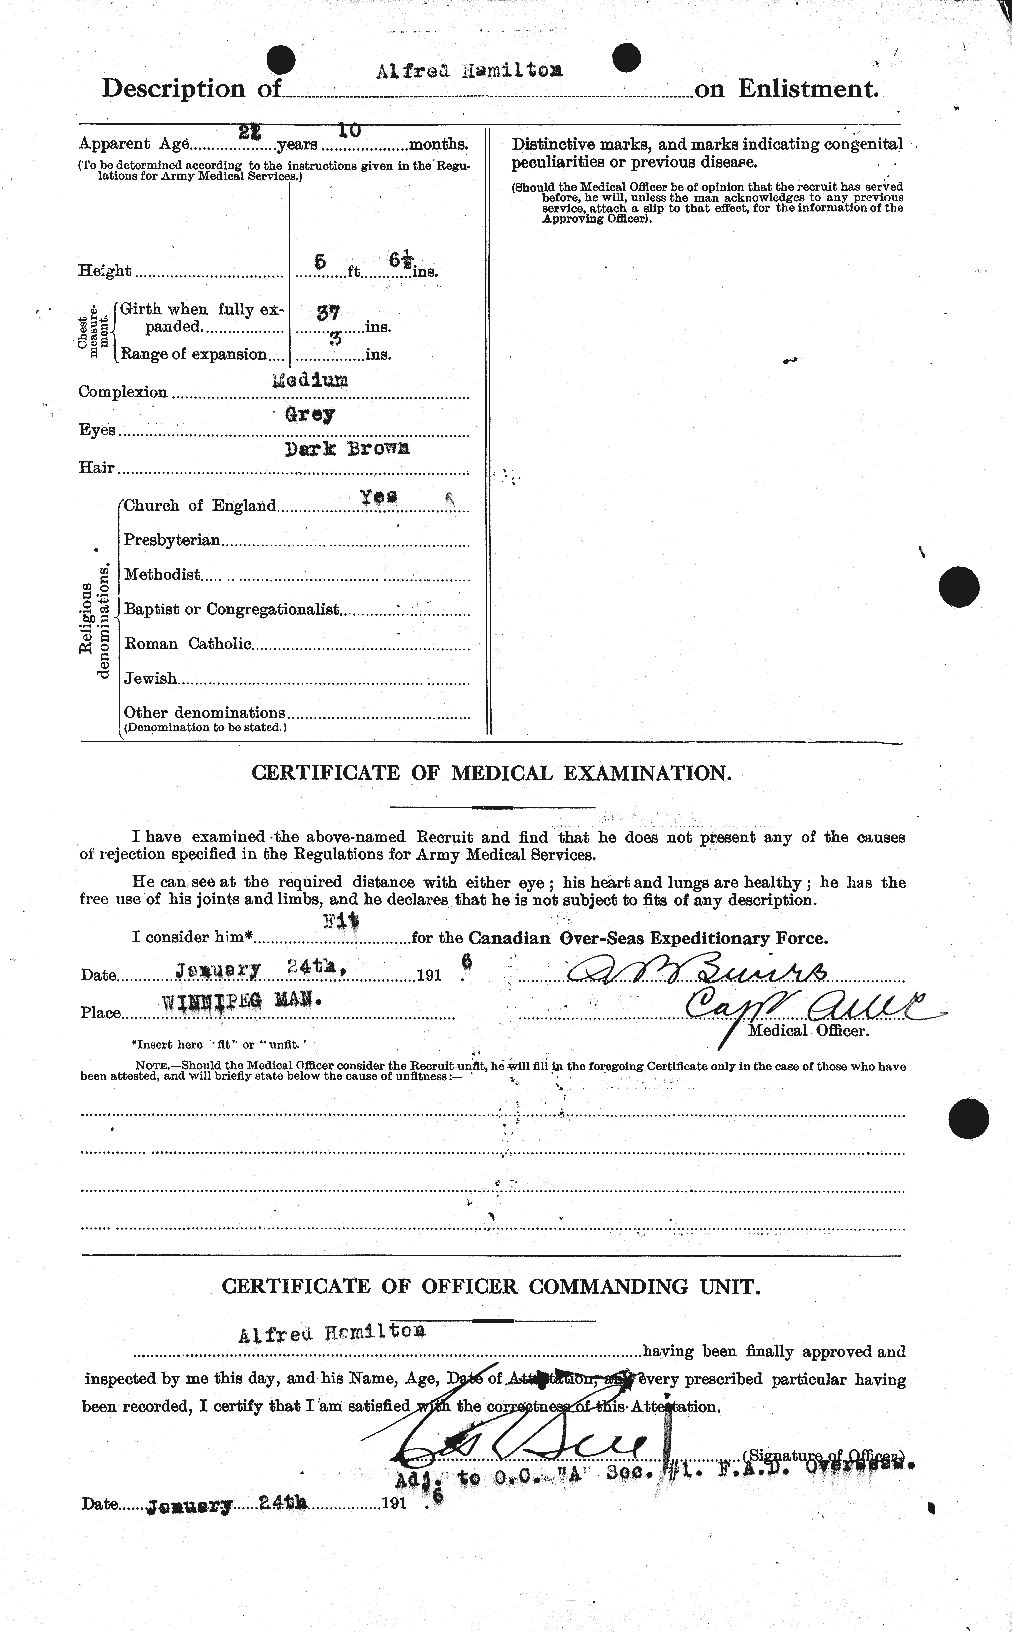 Personnel Records of the First World War - CEF 375212b